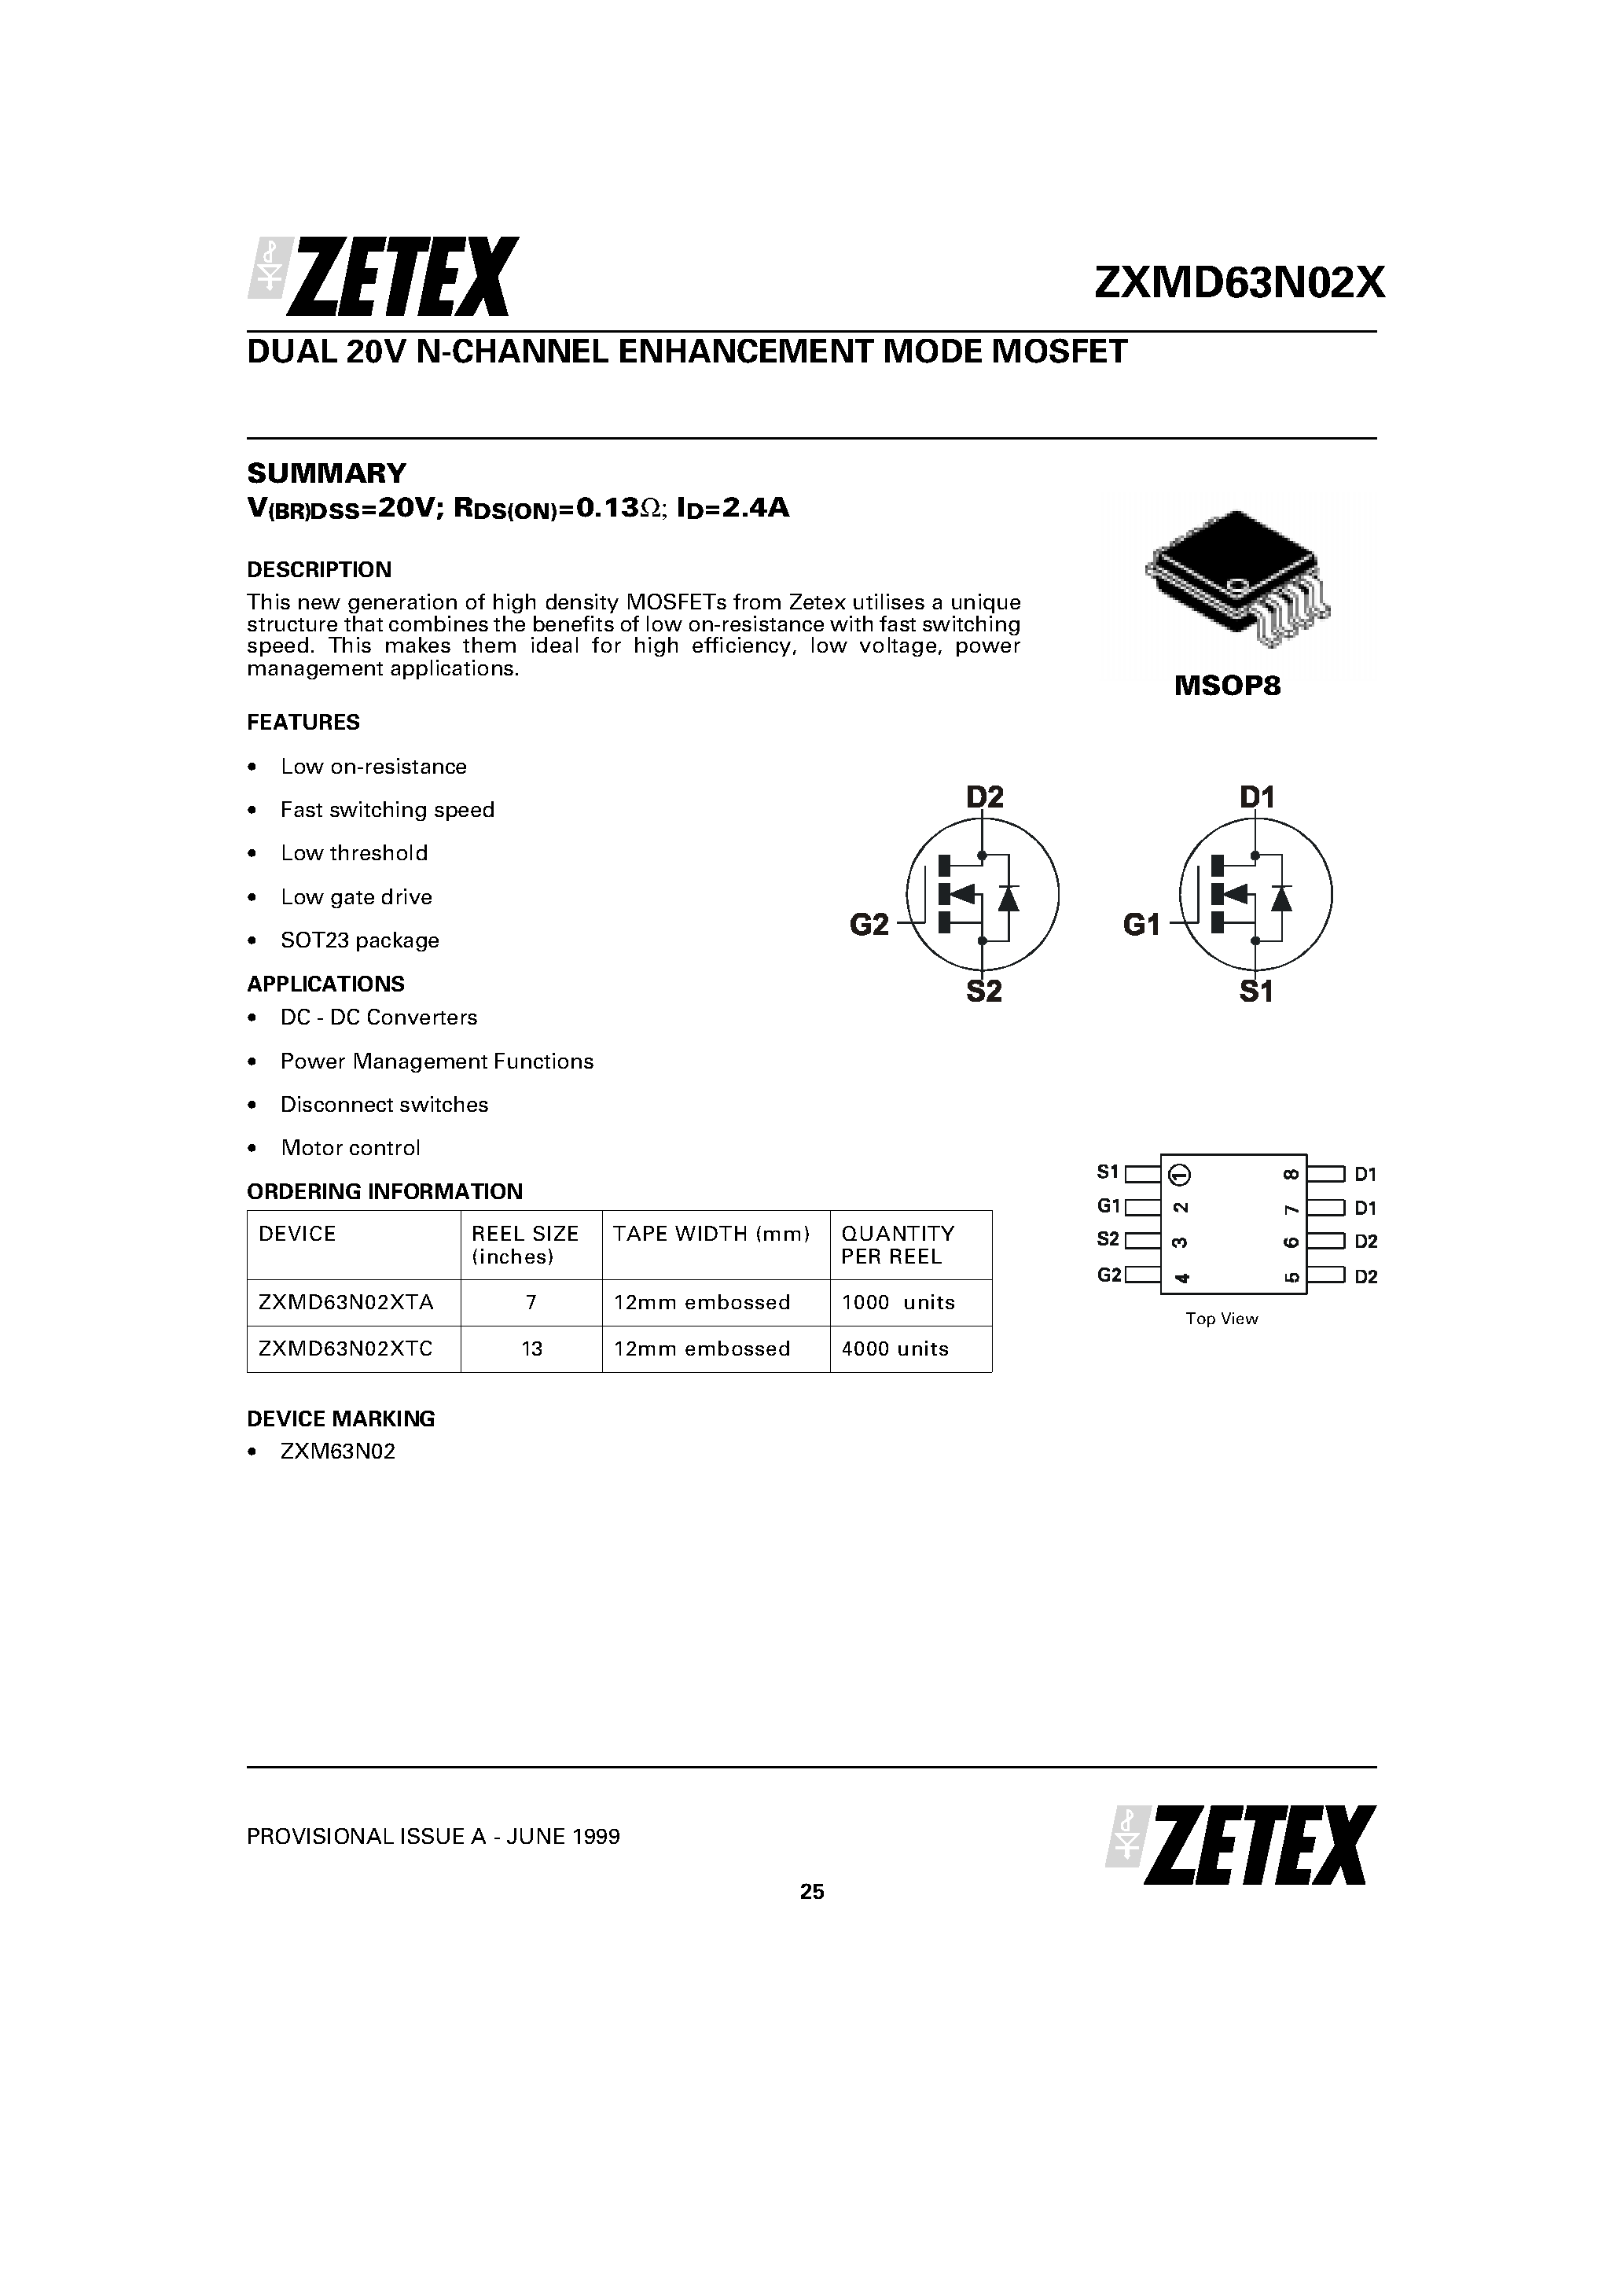 Datasheet ZXMD63N02 - DUAL 20V N-CHANNEL ENHANCEMENT MODE MOSFET page 1